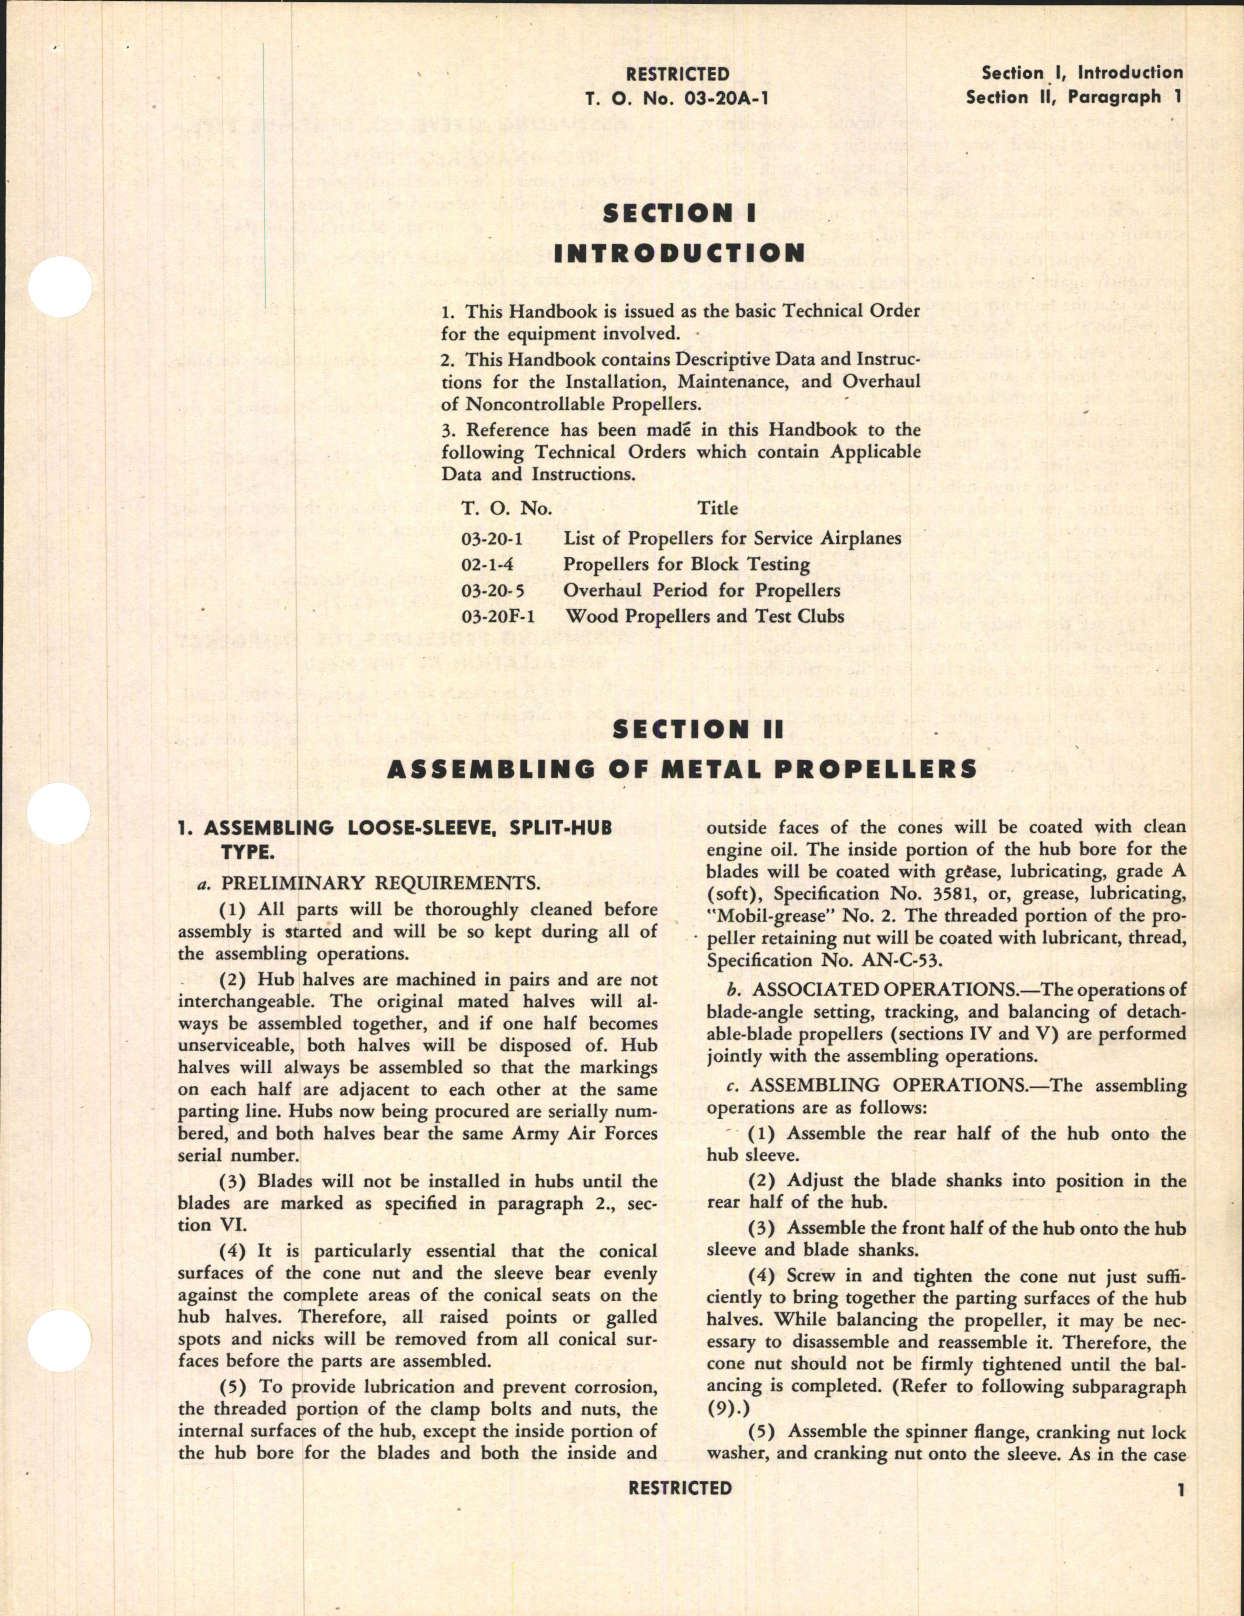 Sample page 5 from AirCorps Library document: Handbook of Instructions for Non-Controllable Propellers